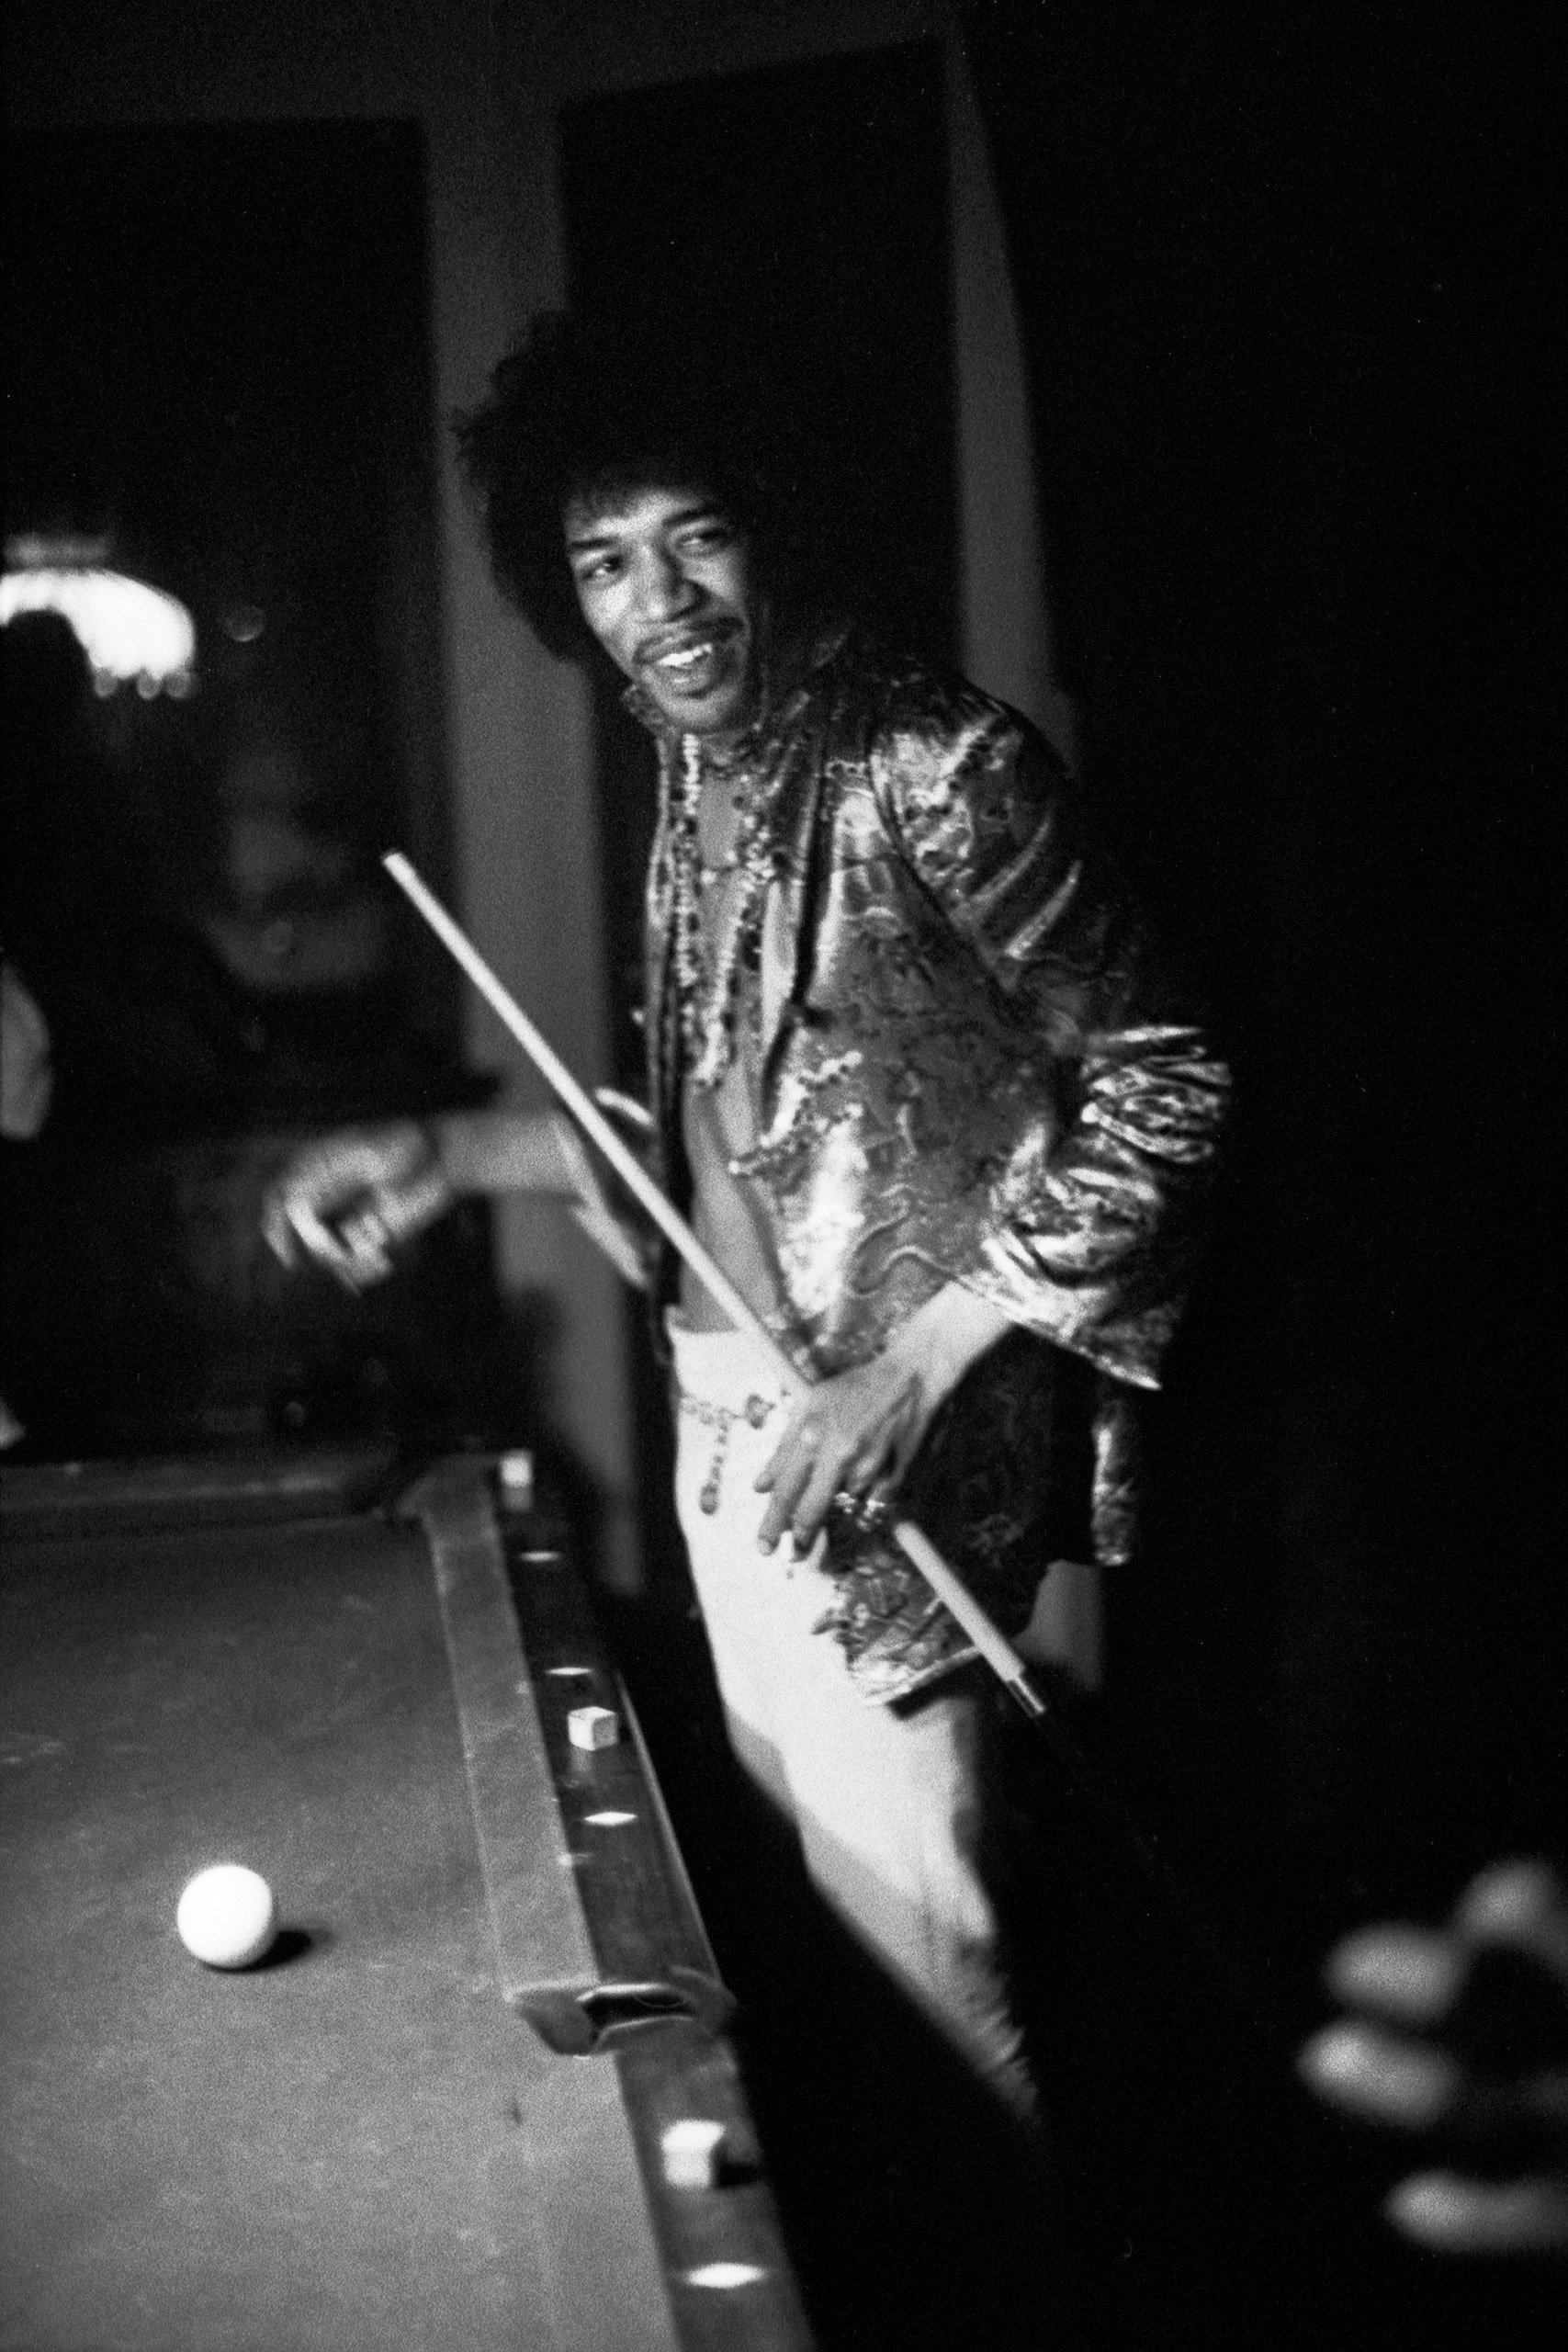 Jimi Hendrix shoots pool at the Bel Air home of John and Michelle Phillips in Los Angeles, California, July 1, 1967.